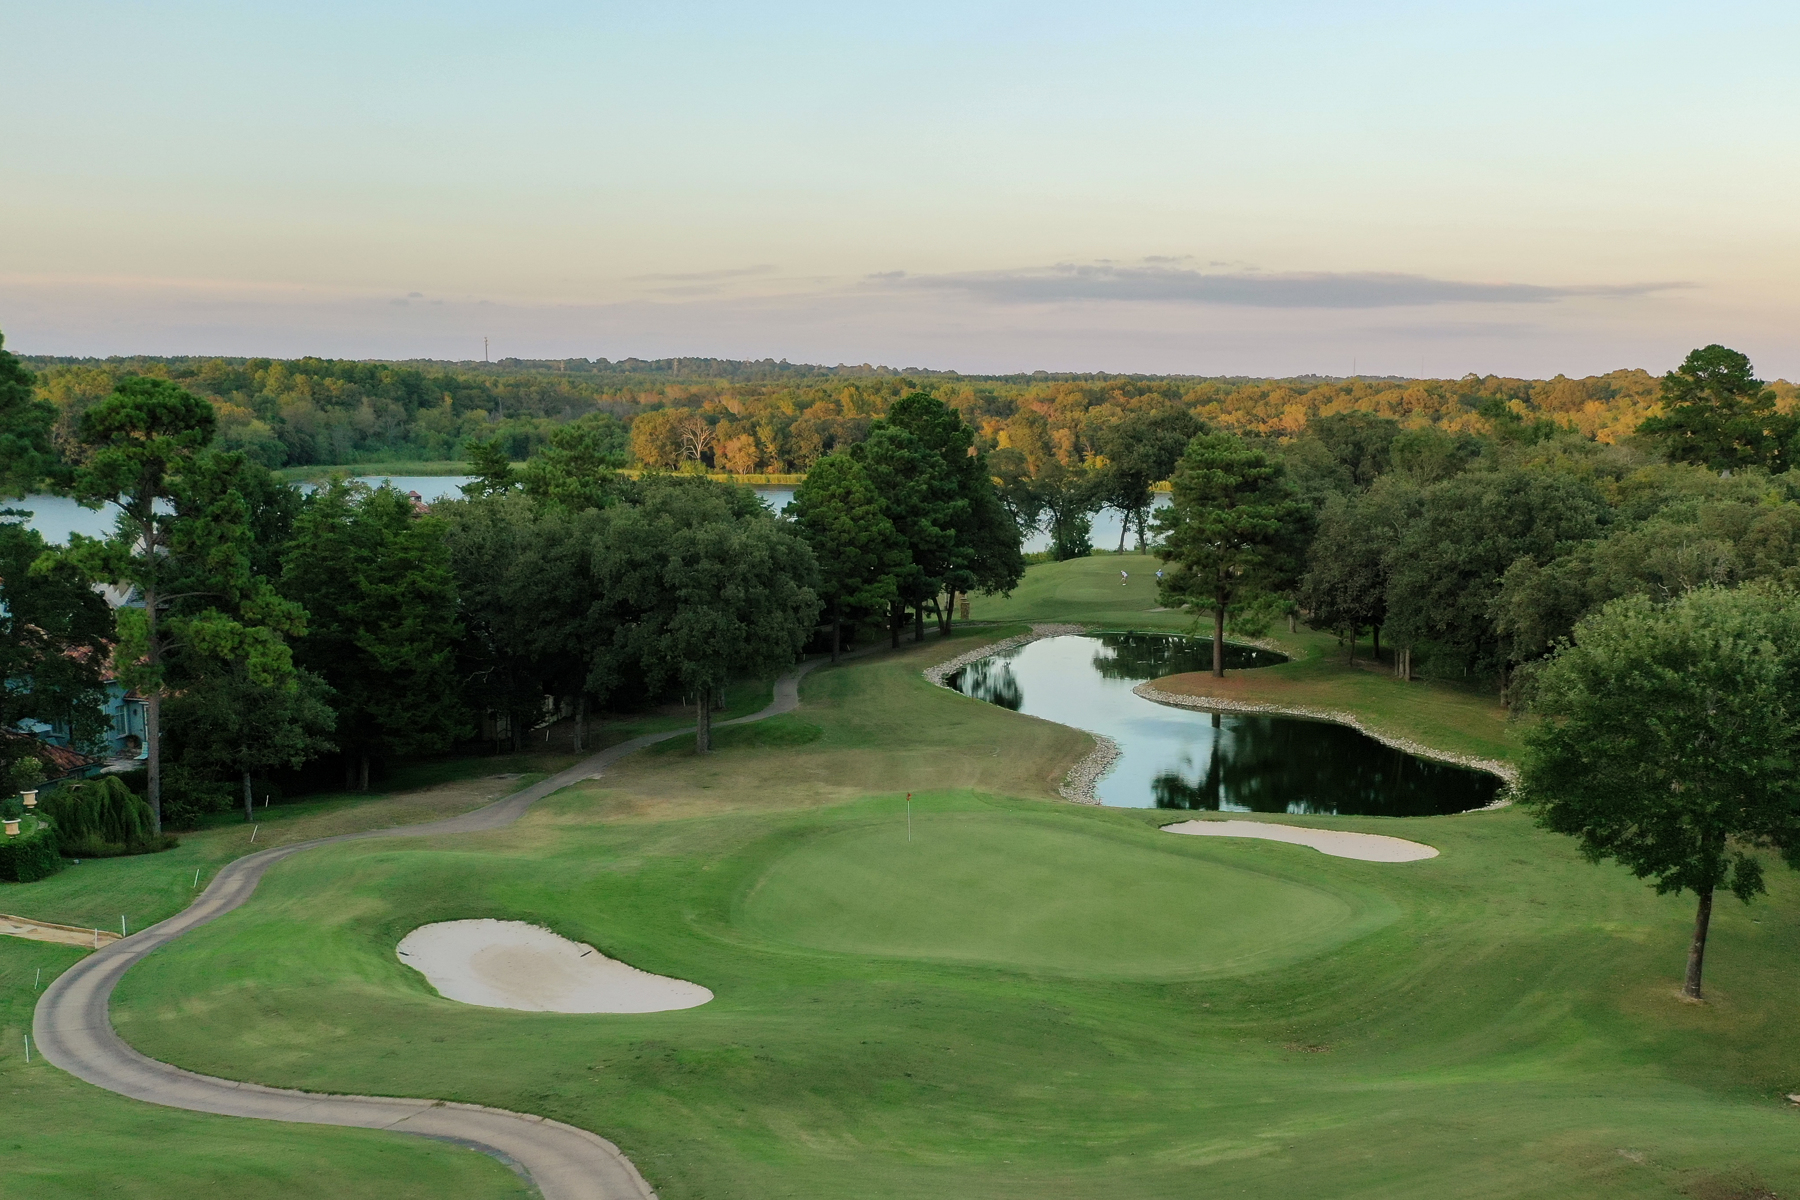 Cascades of Texas is the premiere golfing community in East Texas